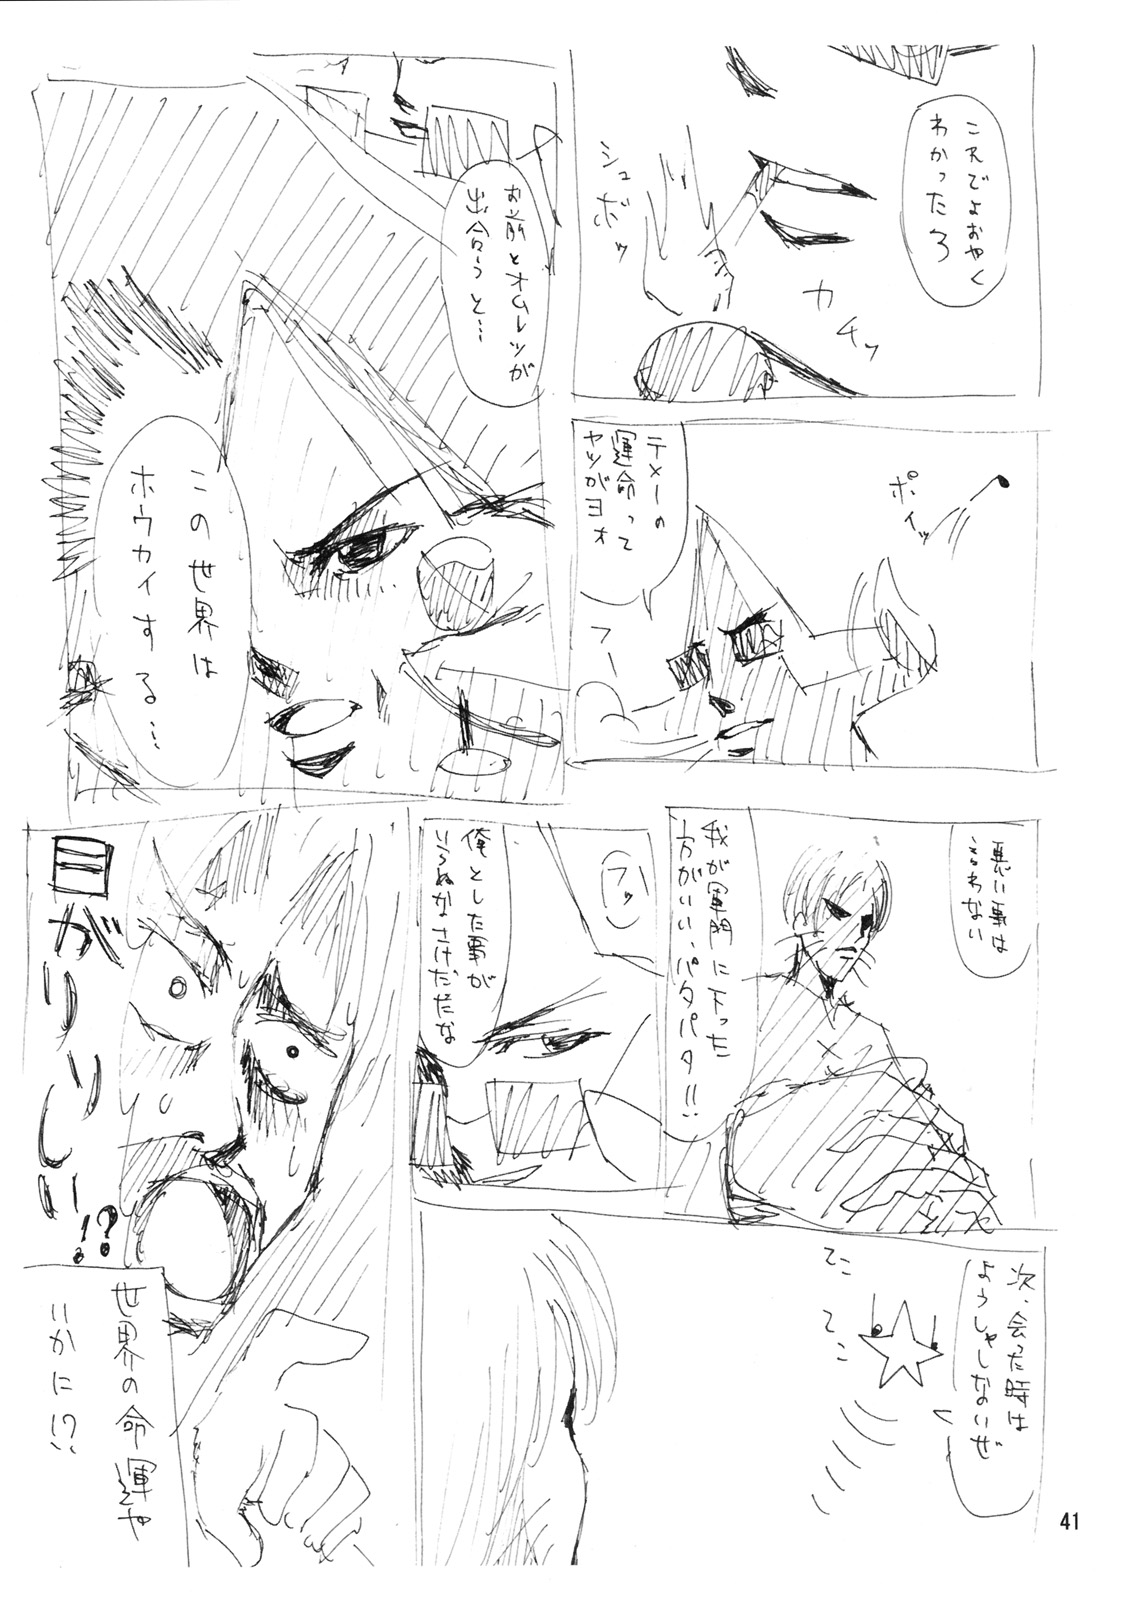 [3g (Junkie)] DOF Mai (King of Fighters) page 40 full